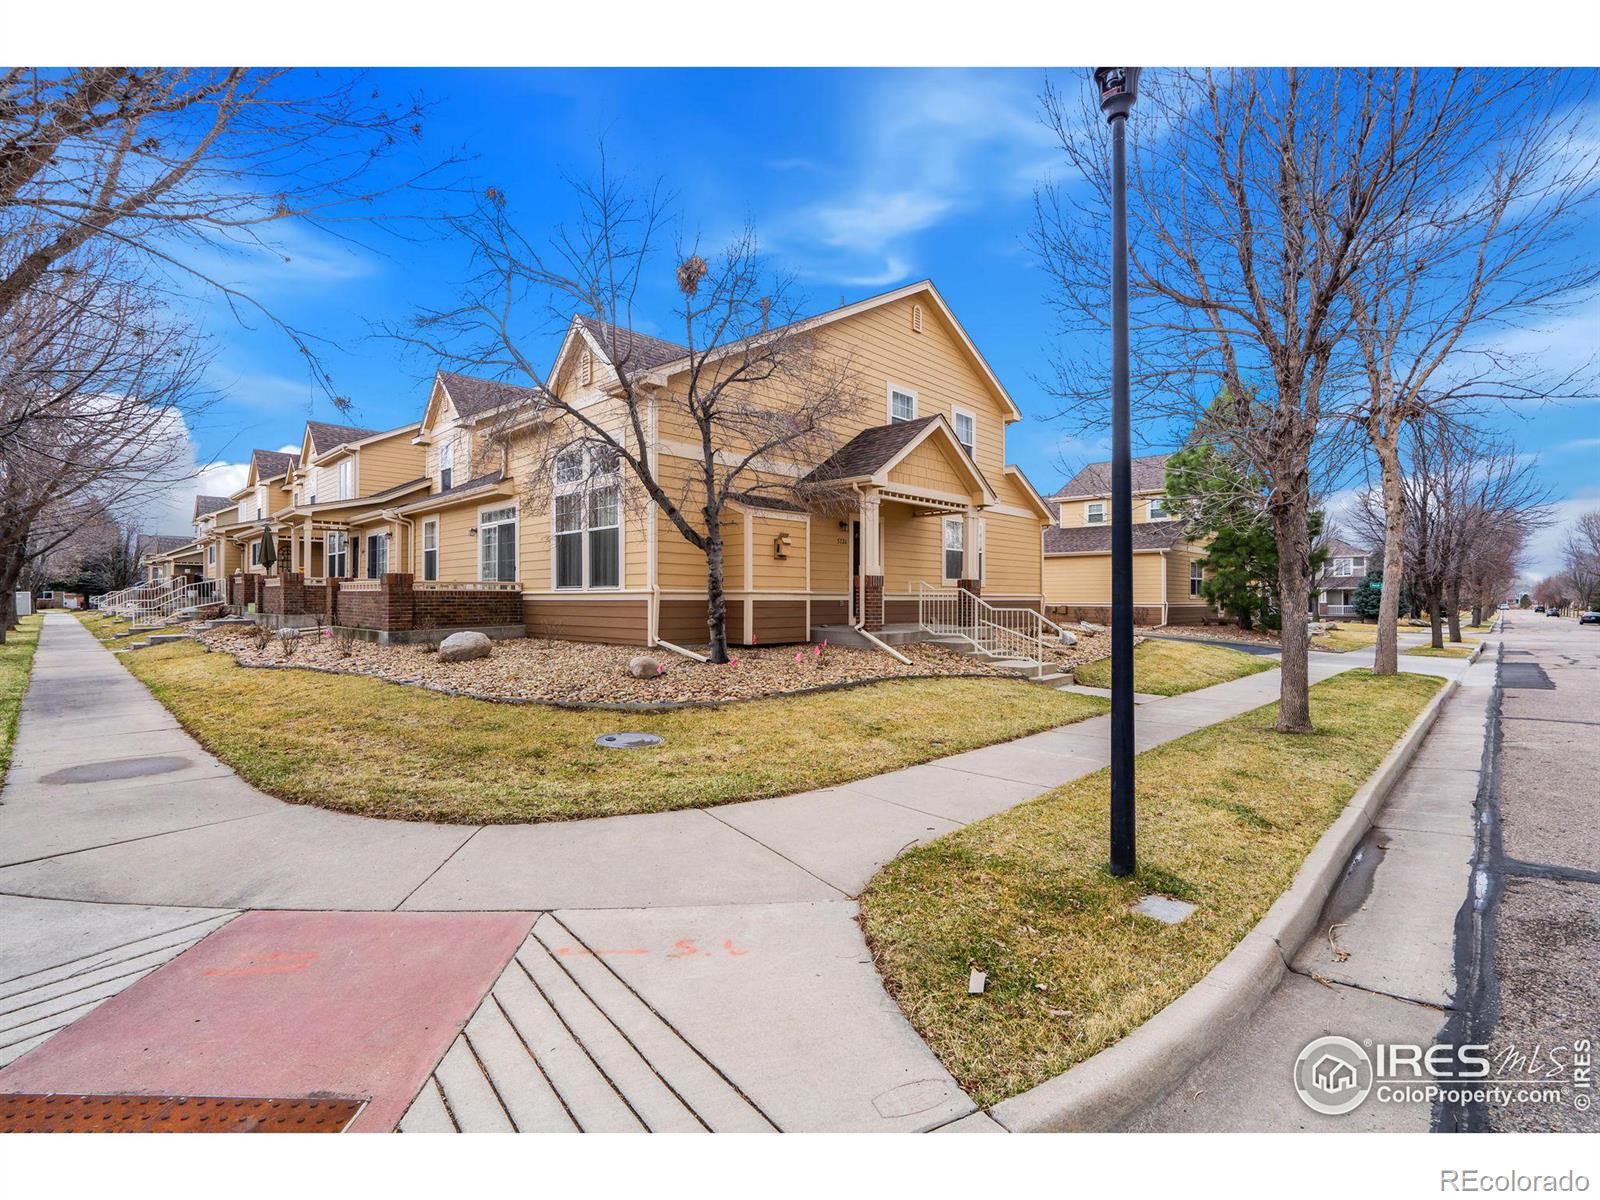 Report Image for 5126  Mill Stone Way,Fort Collins, Colorado